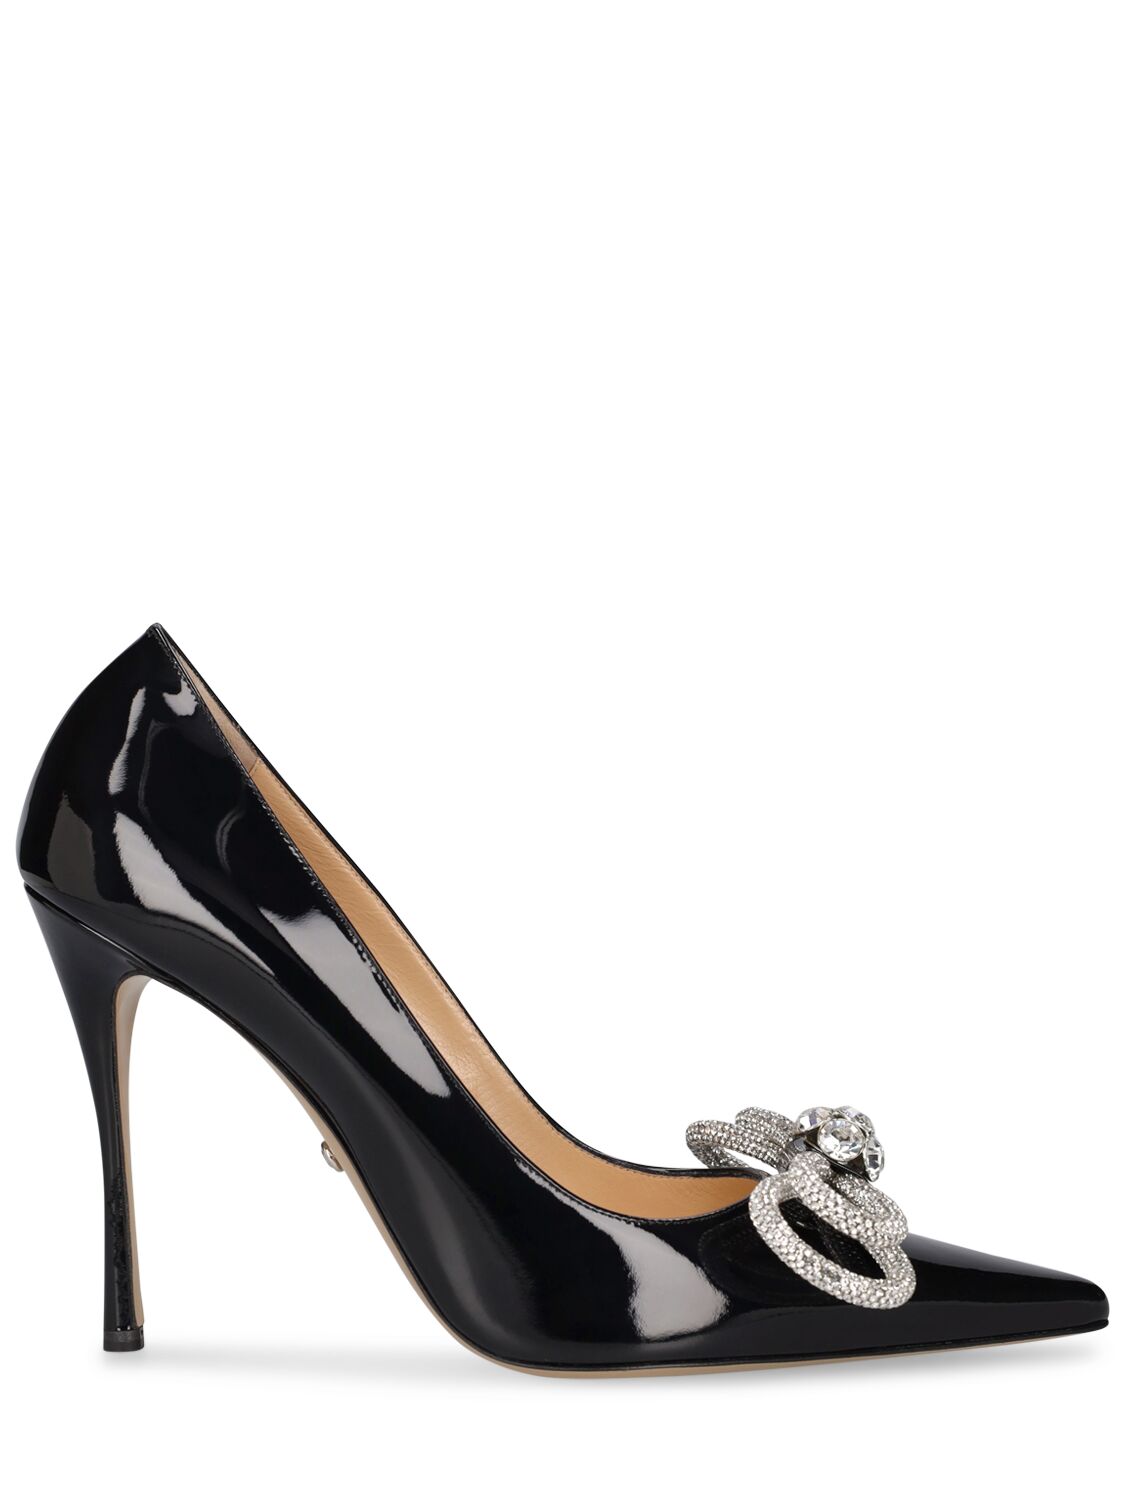 Mach & Mach 110mm Double Bow Patent Leather Heels In Black